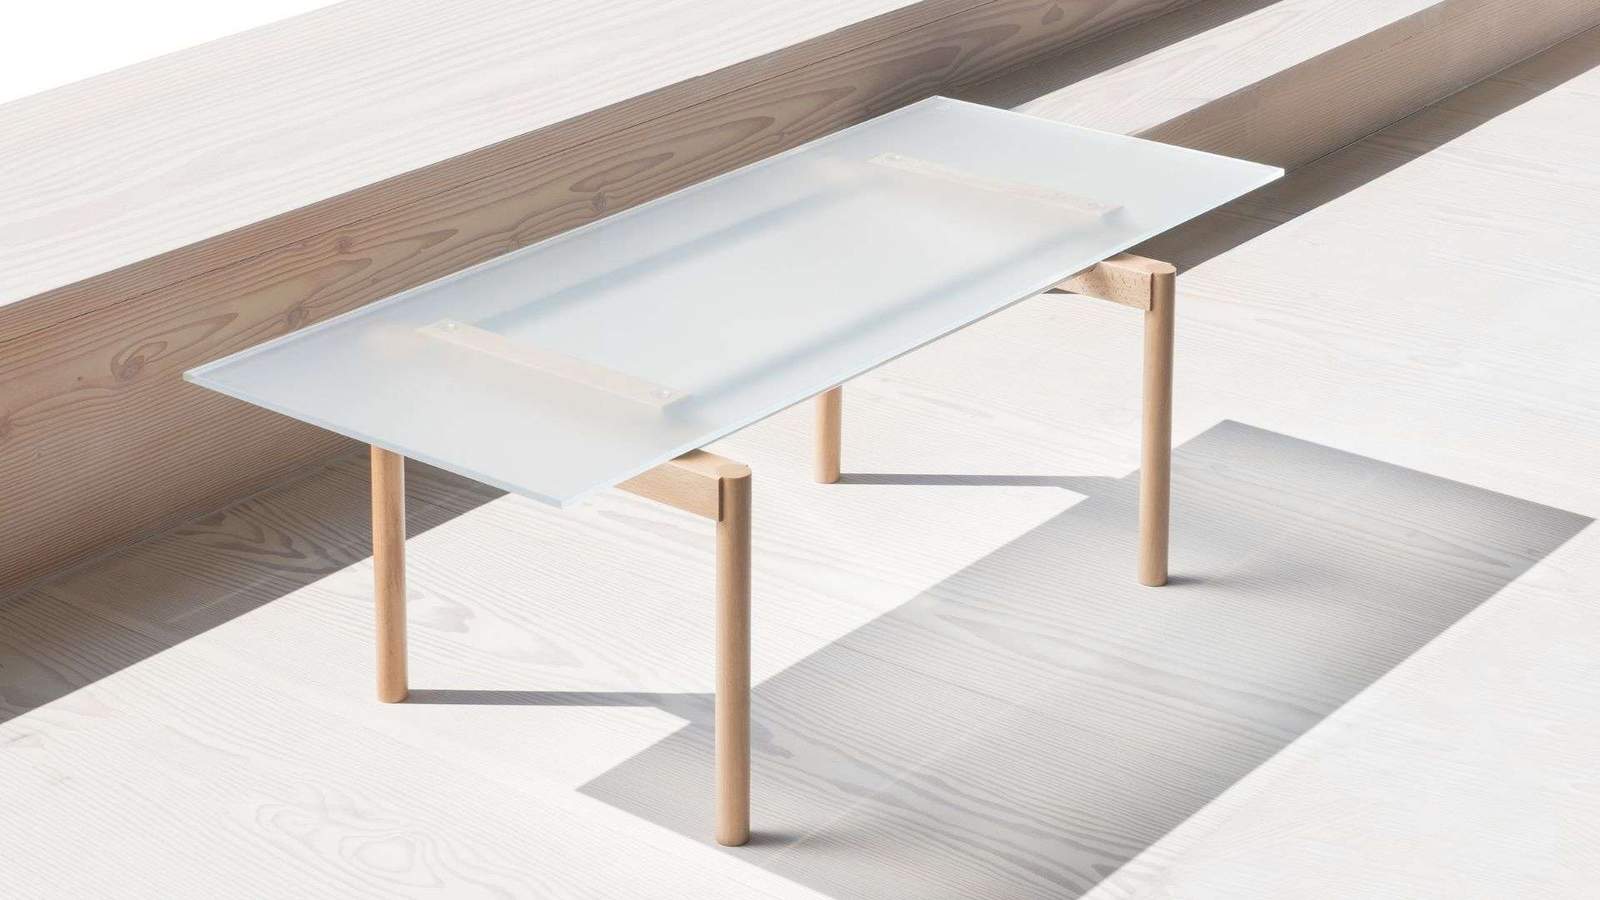 Blur Table is an aesthetic piece of furniture